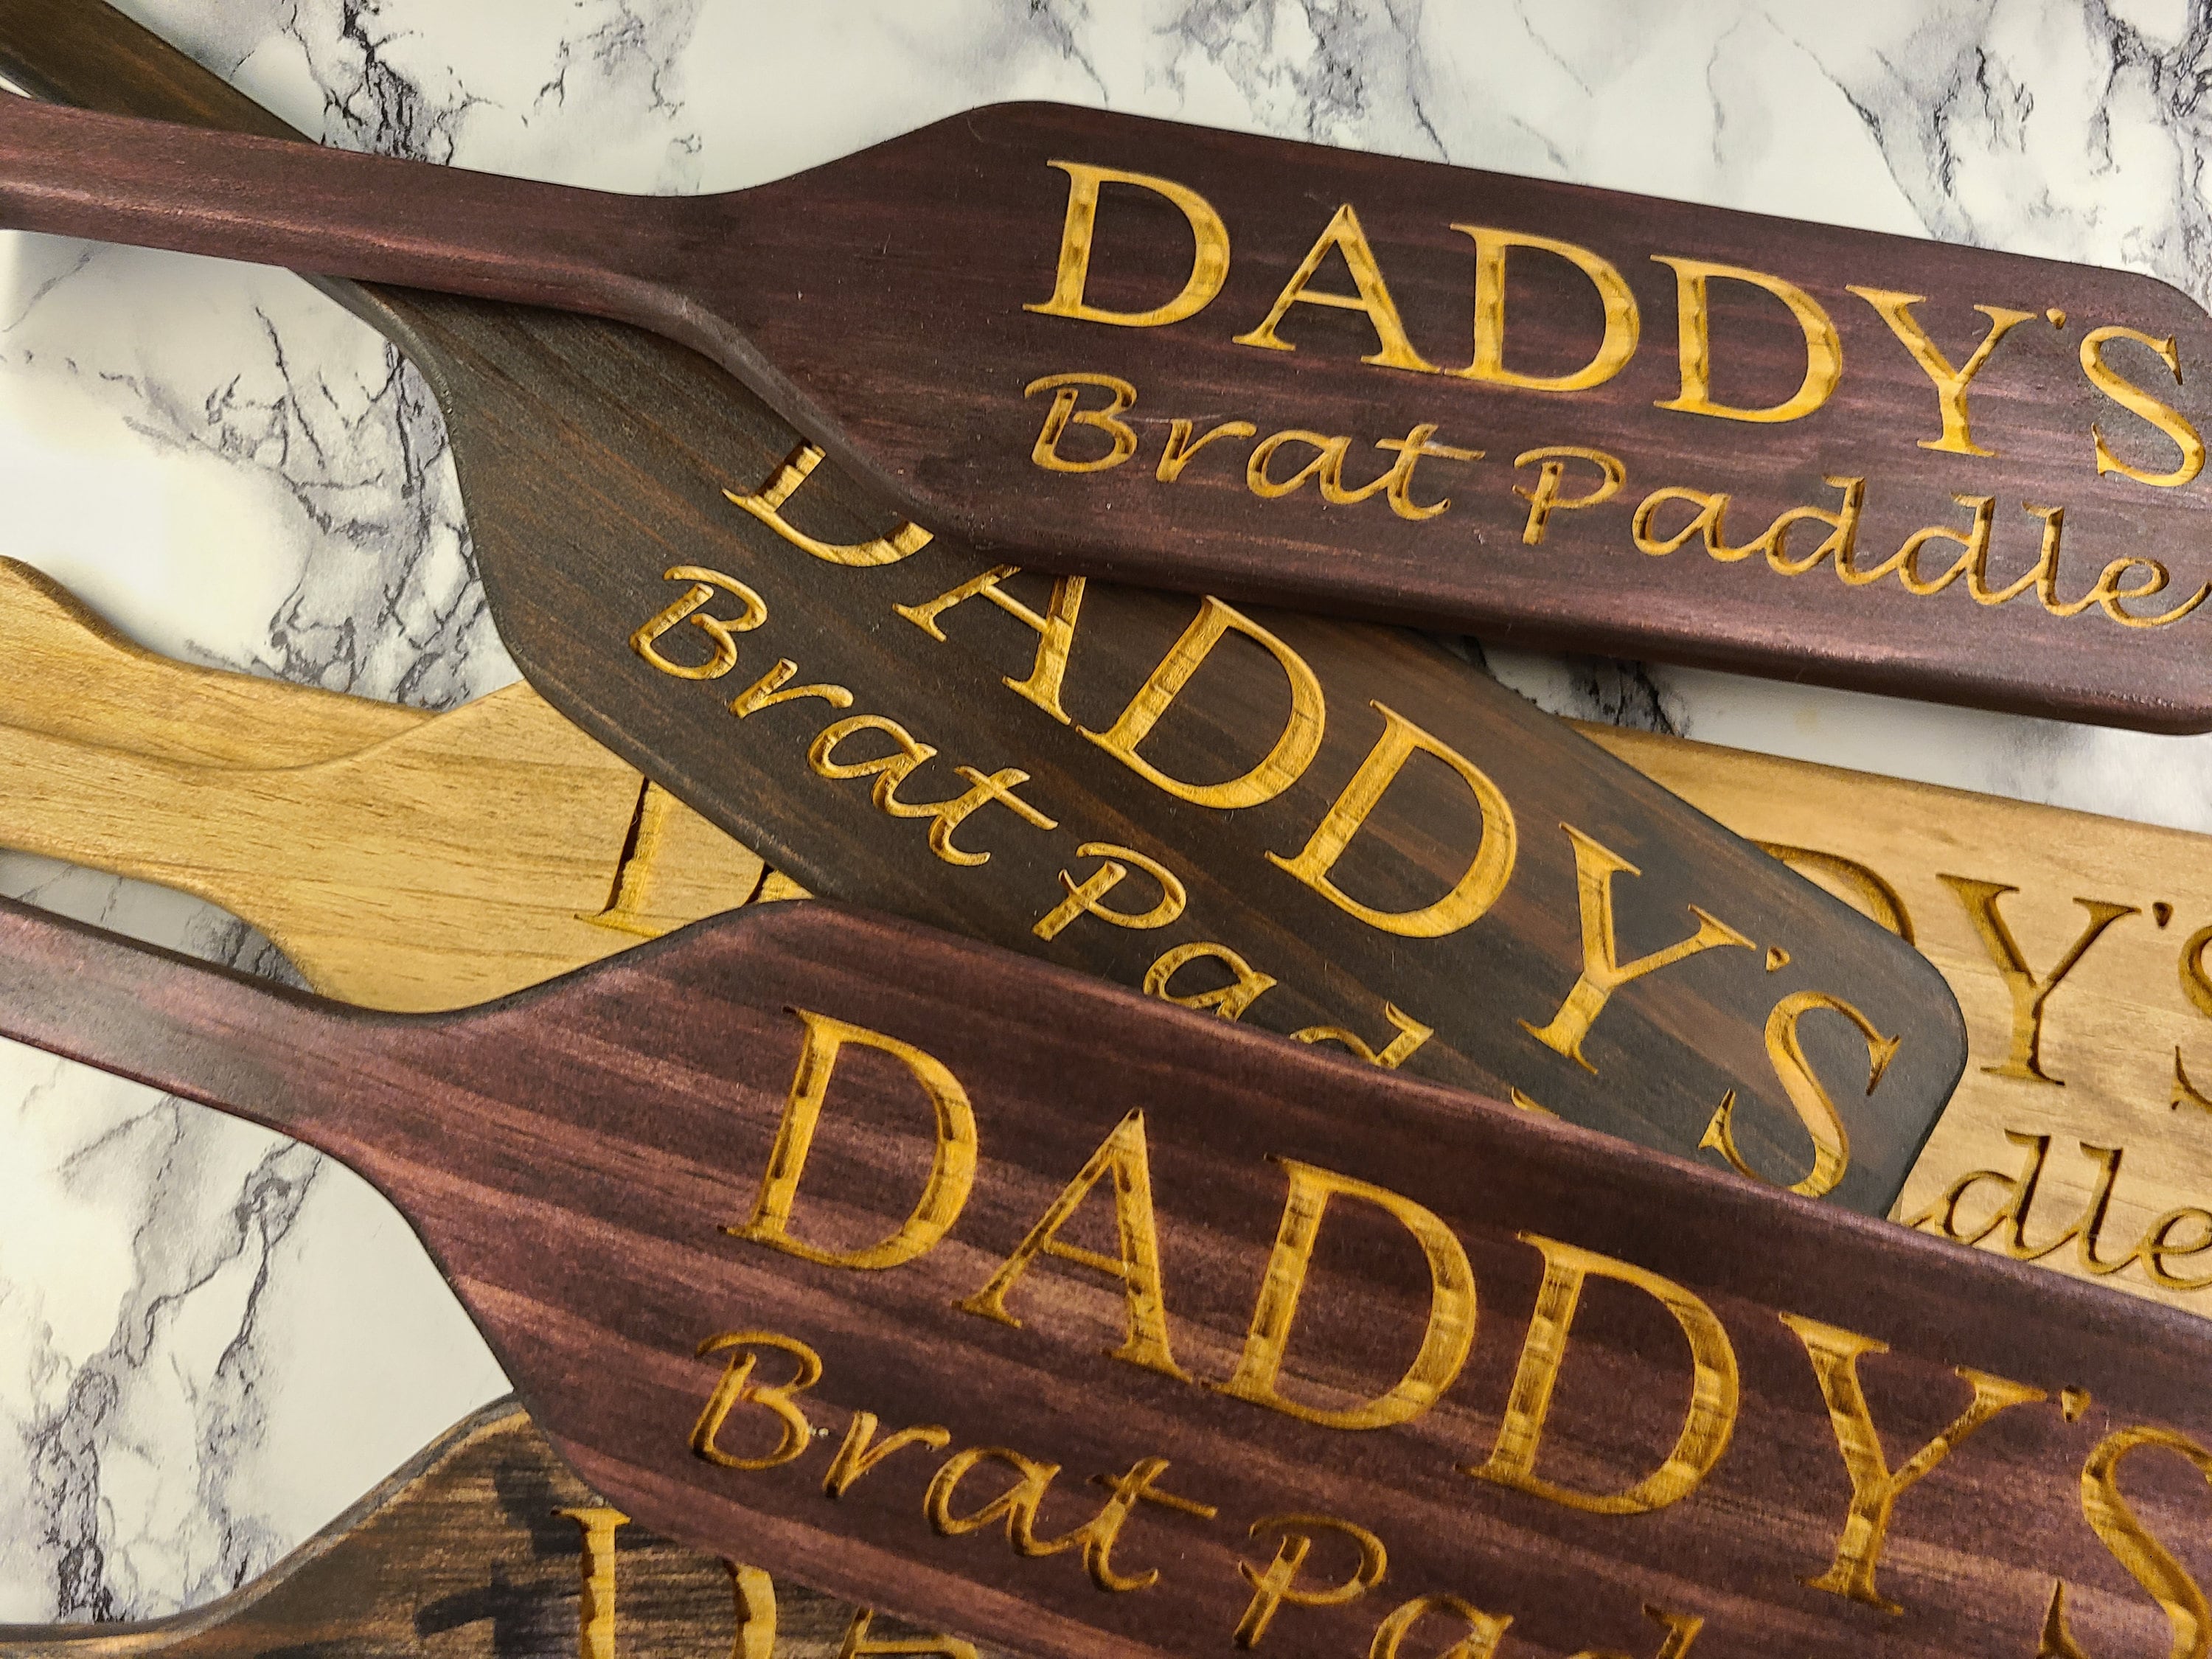 New BRAT Wooden Spanking Paddle Sapele Color Choice Made By The Royal Castle